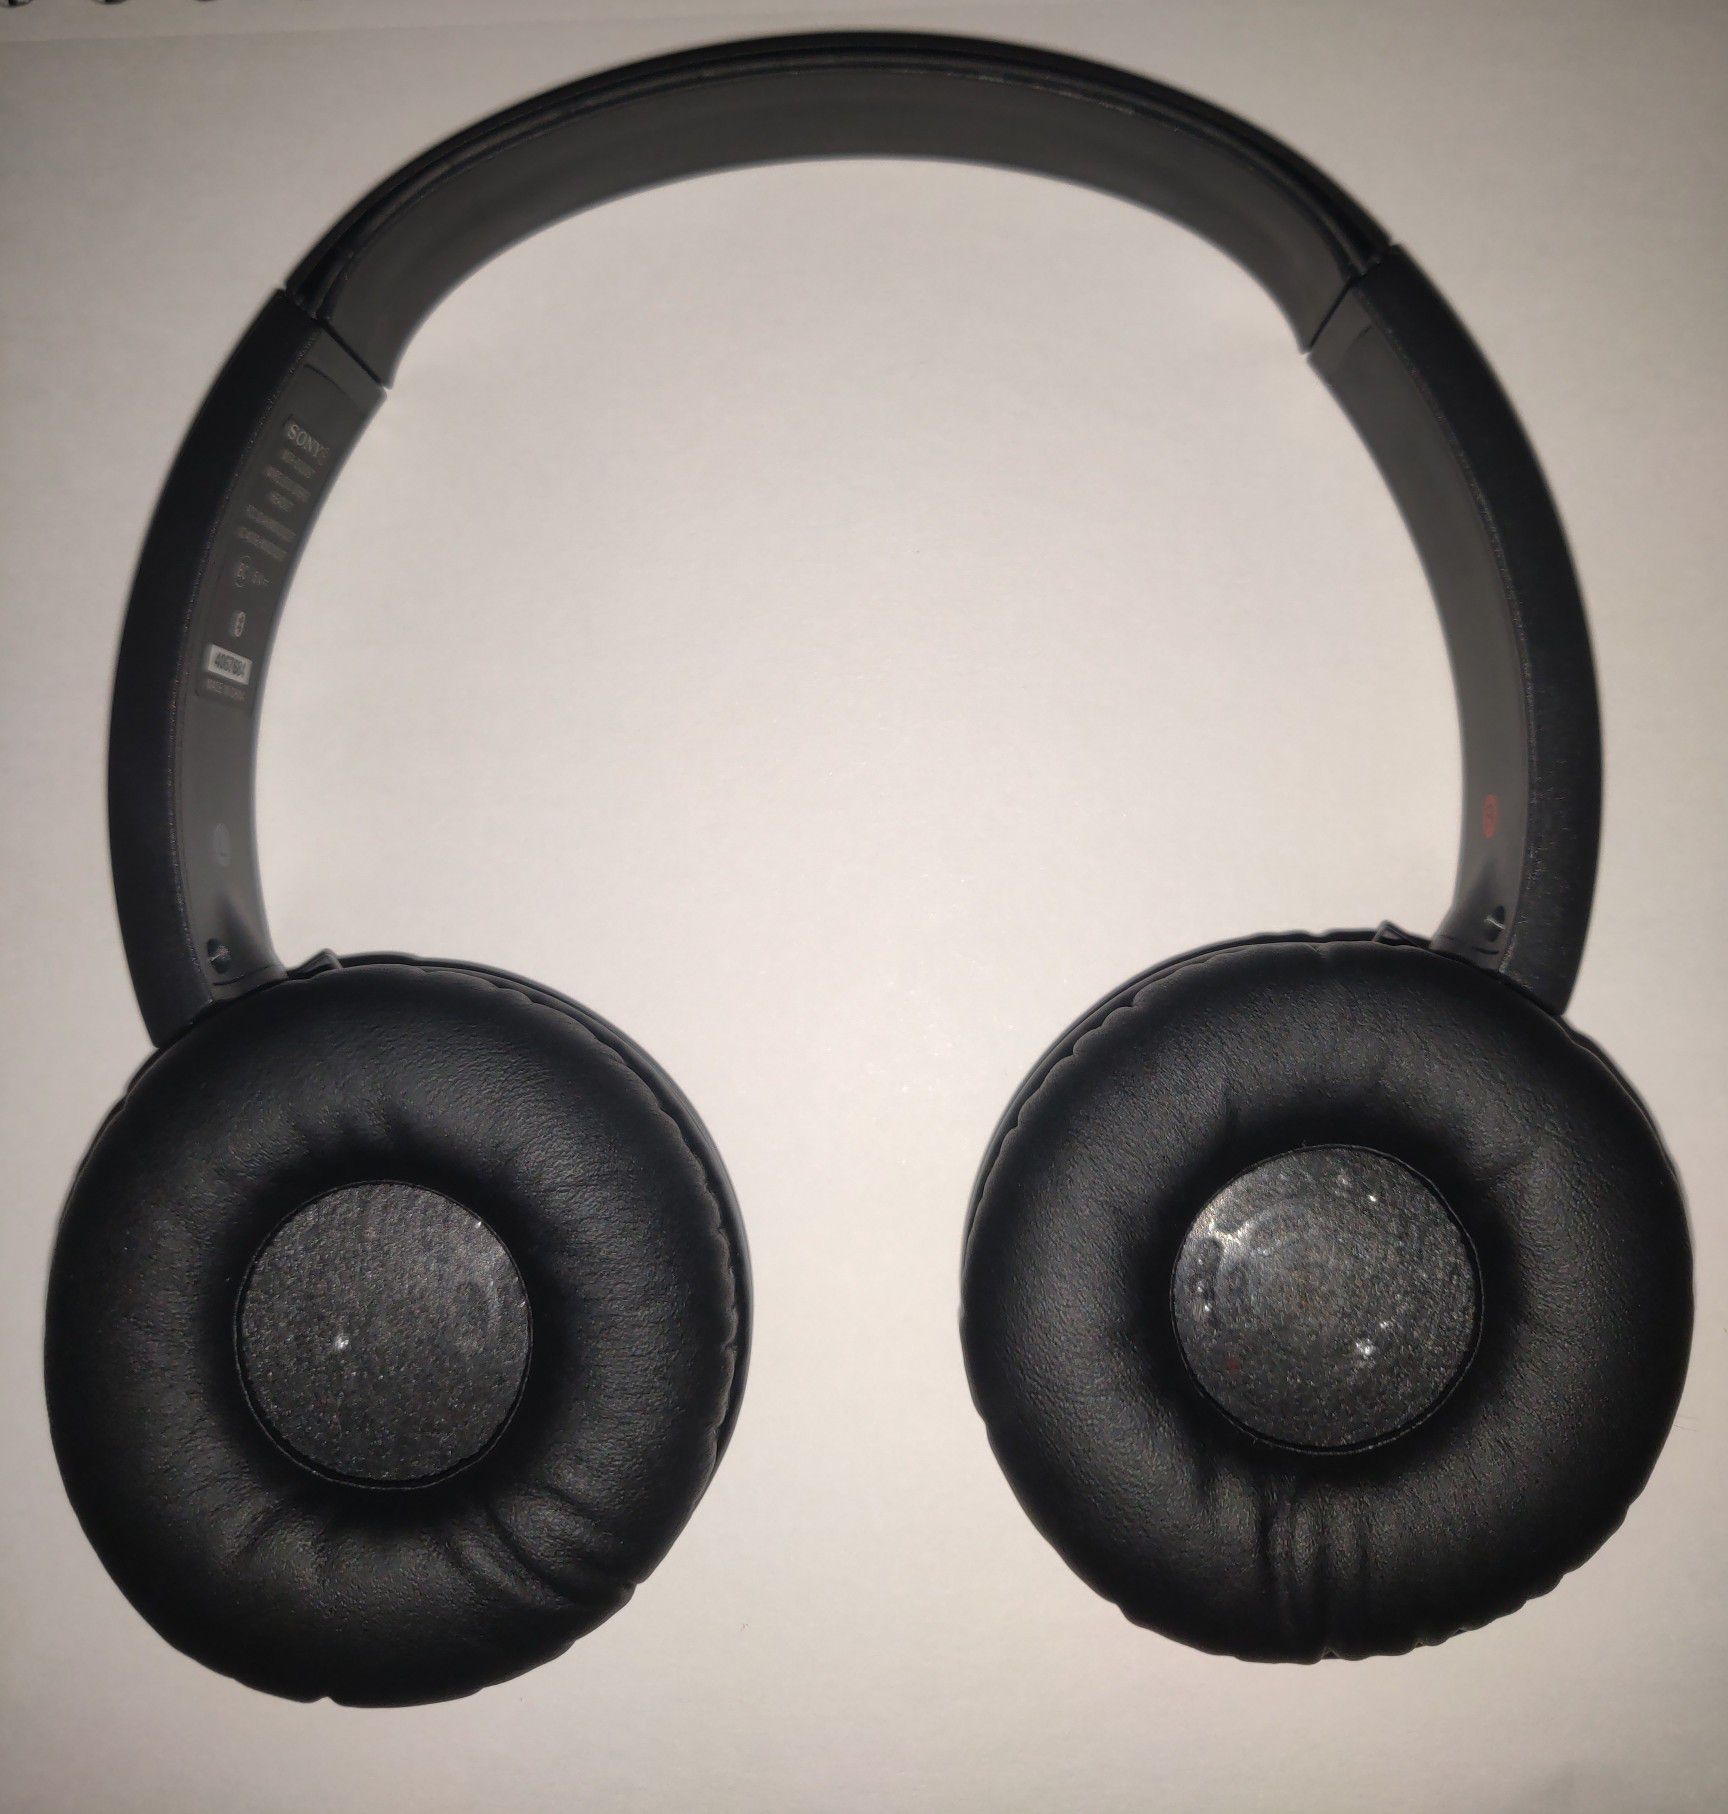 Sony Bluetooth Noise Cancelling Headphones